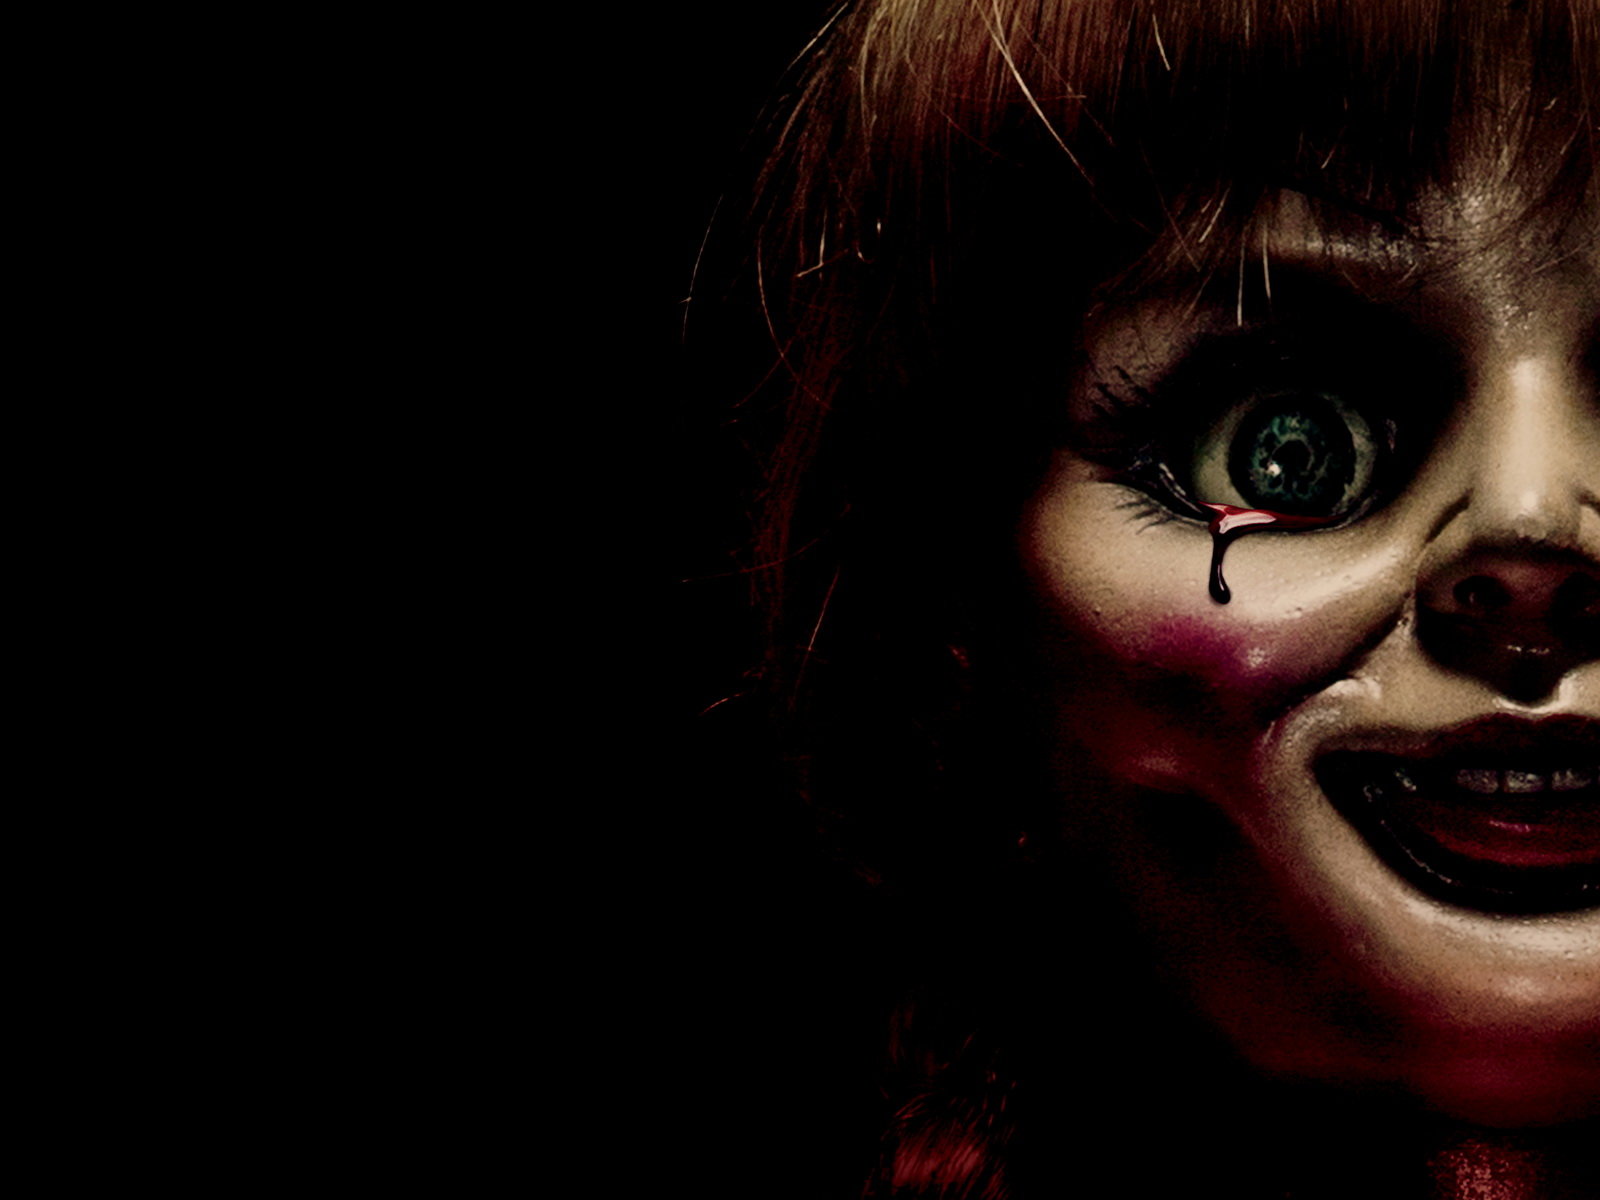 Annabelle wallpapers HD for desktop backgrounds